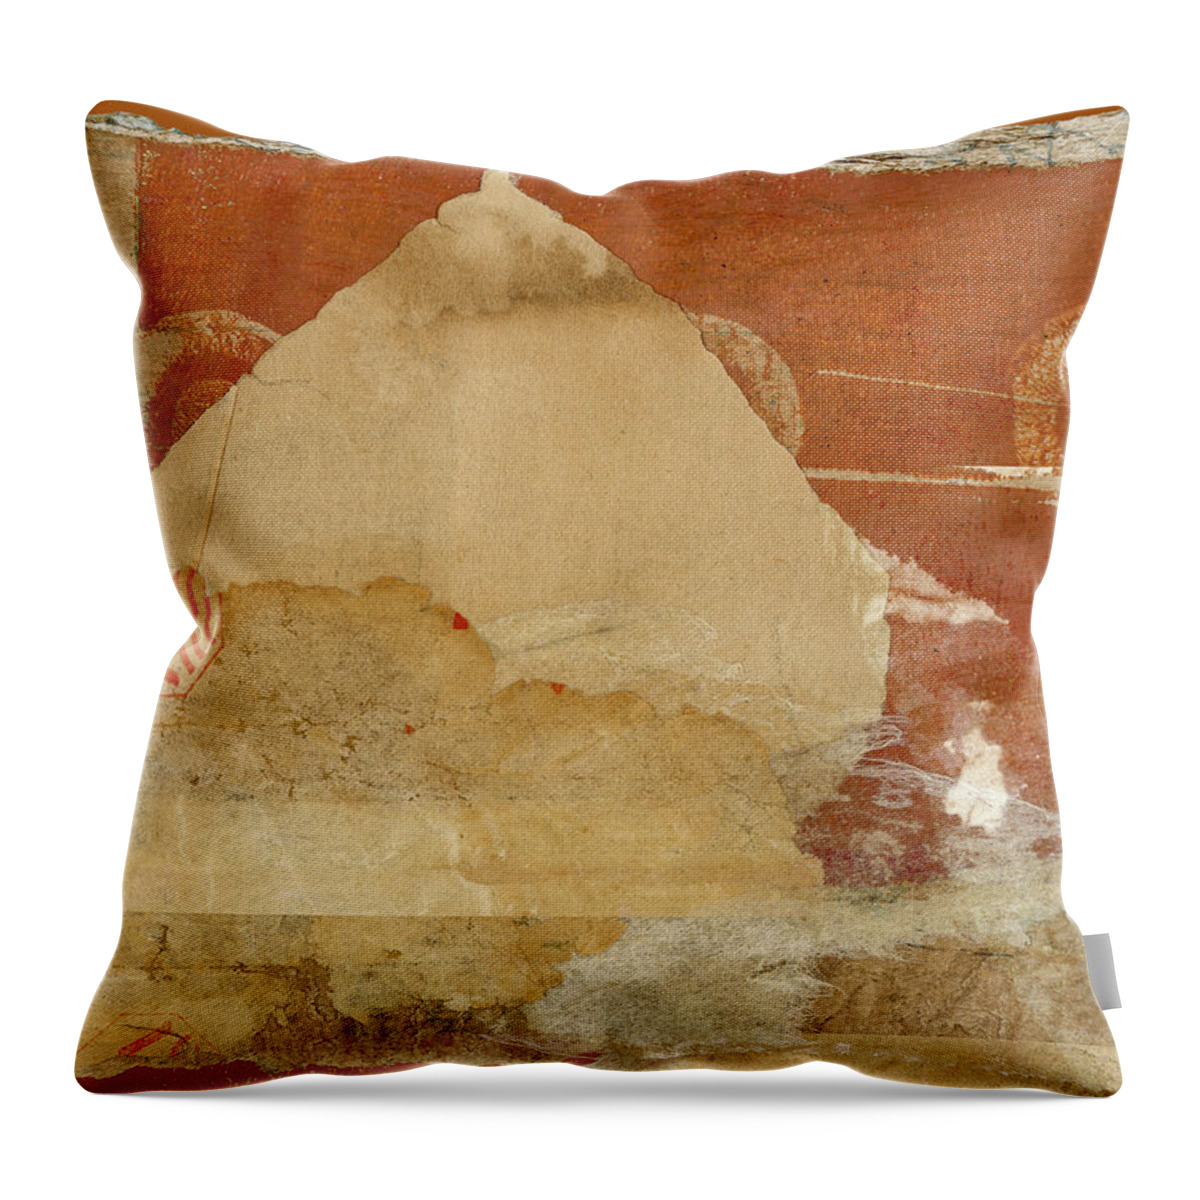 Collage Throw Pillow featuring the mixed media Burnt Orange Collage by Carol Leigh